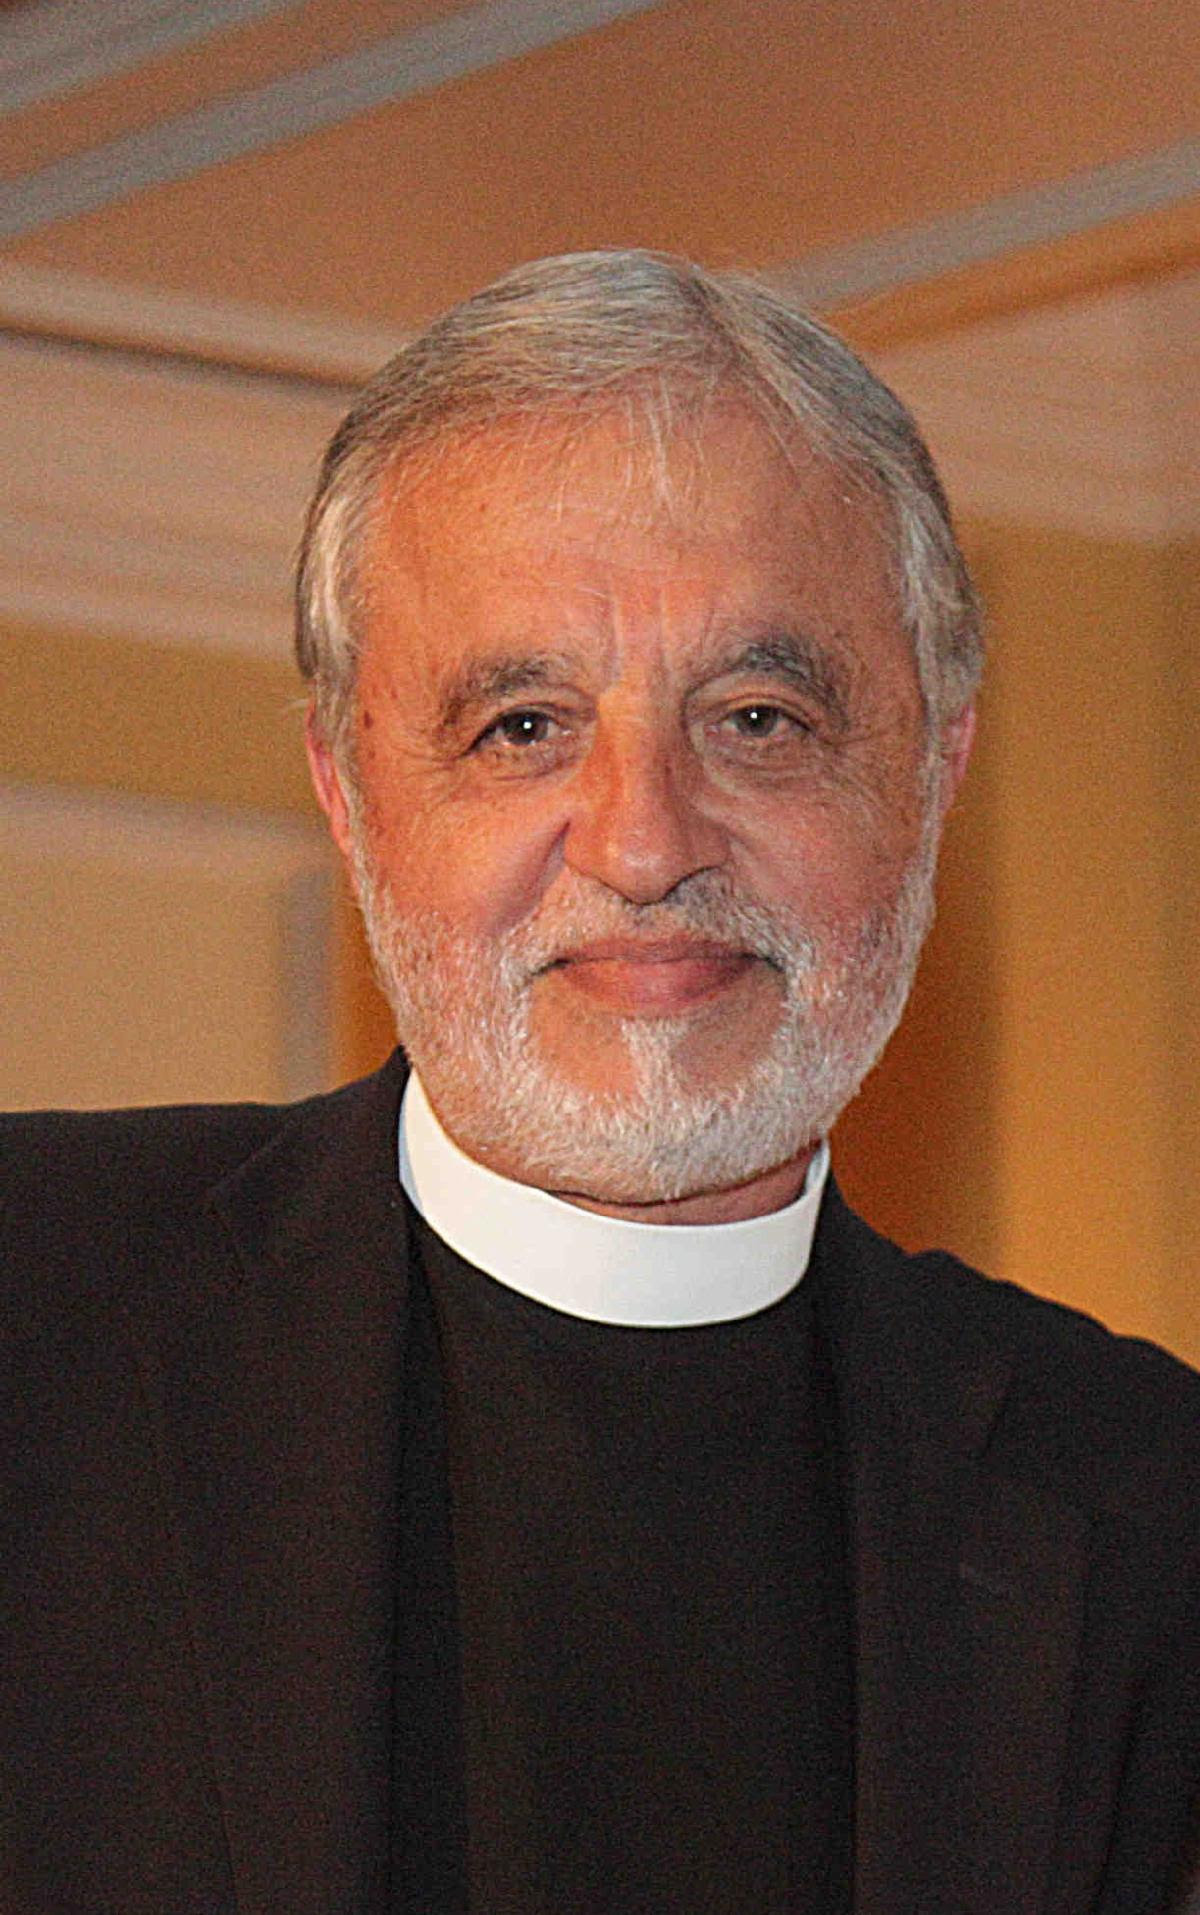 AHEPA Congratulates Father Karloutsos, A Recipient of the Presidential Medal of Freedom